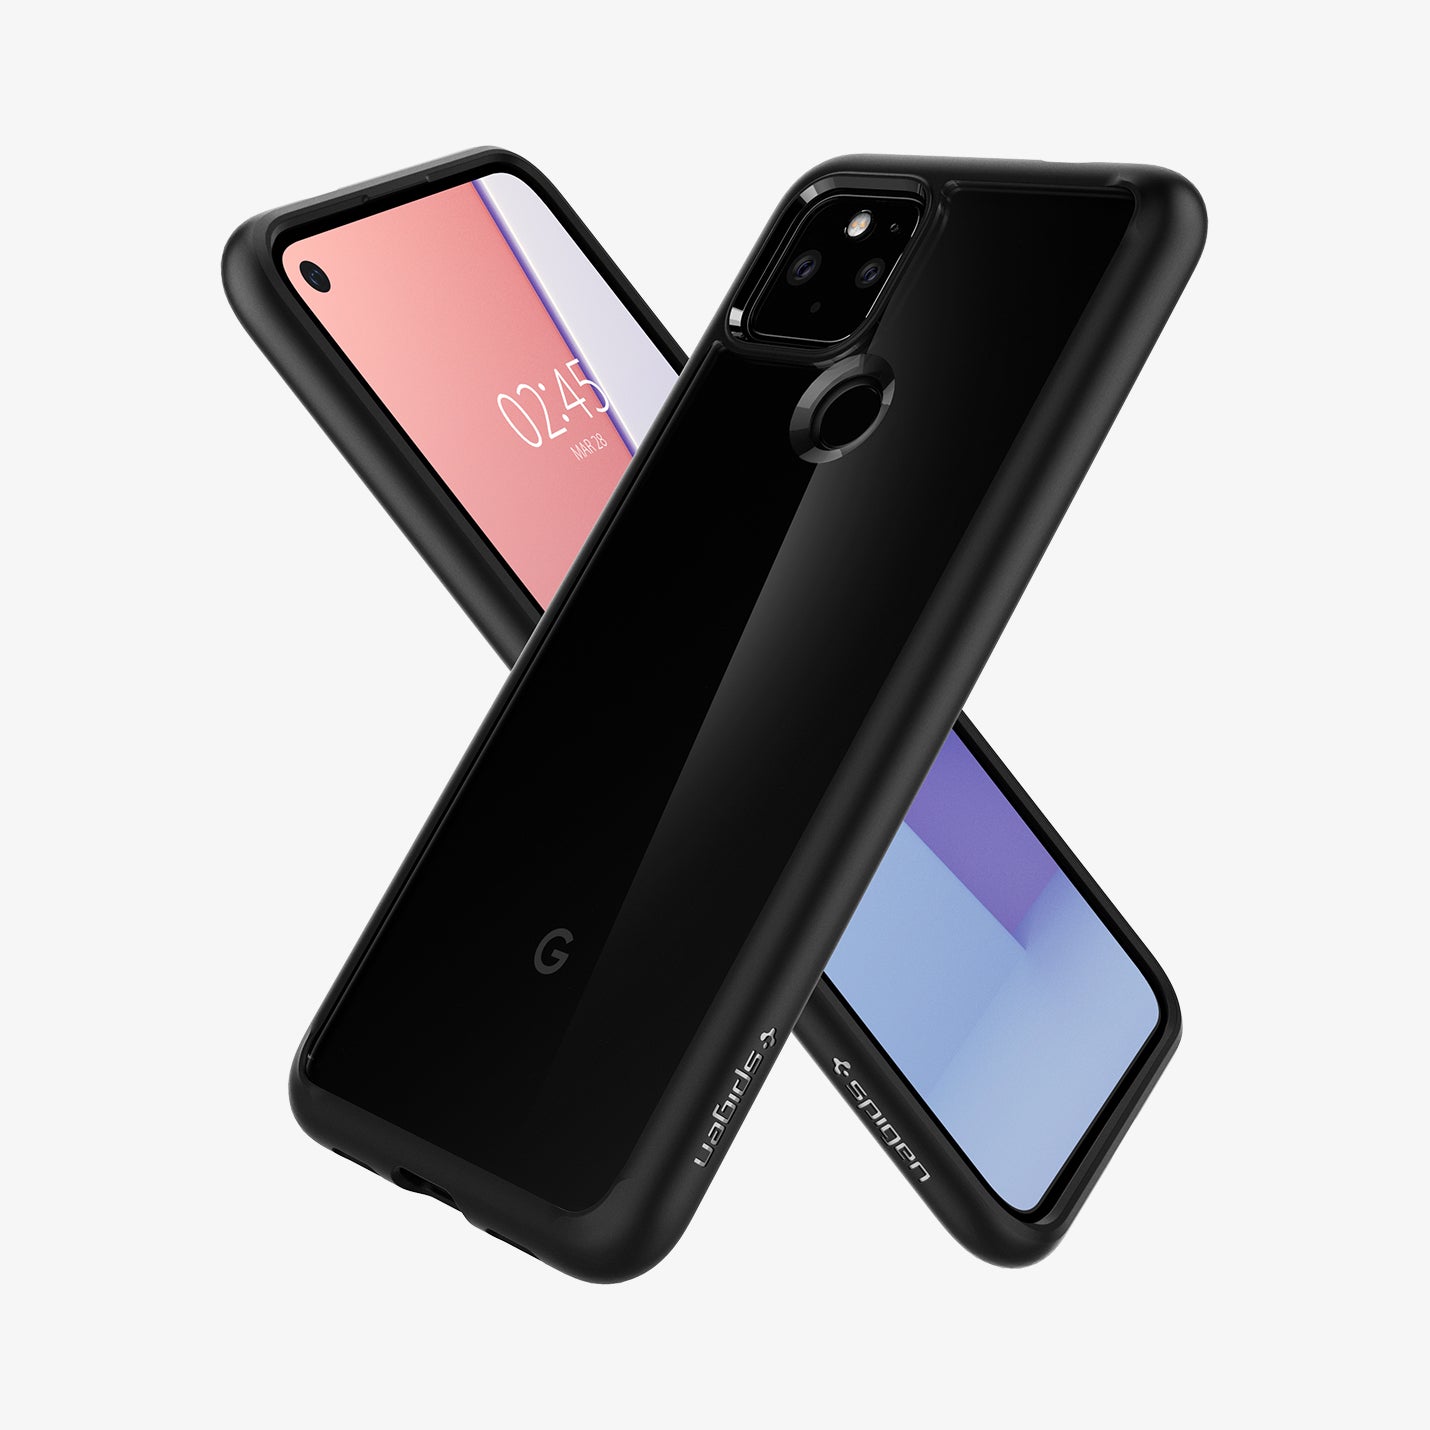 ACS01882 - Pixel 4a (5G) Case Ultra Hybrid in Matte Black showing the back, partial side beside it, a device showing partial front and side